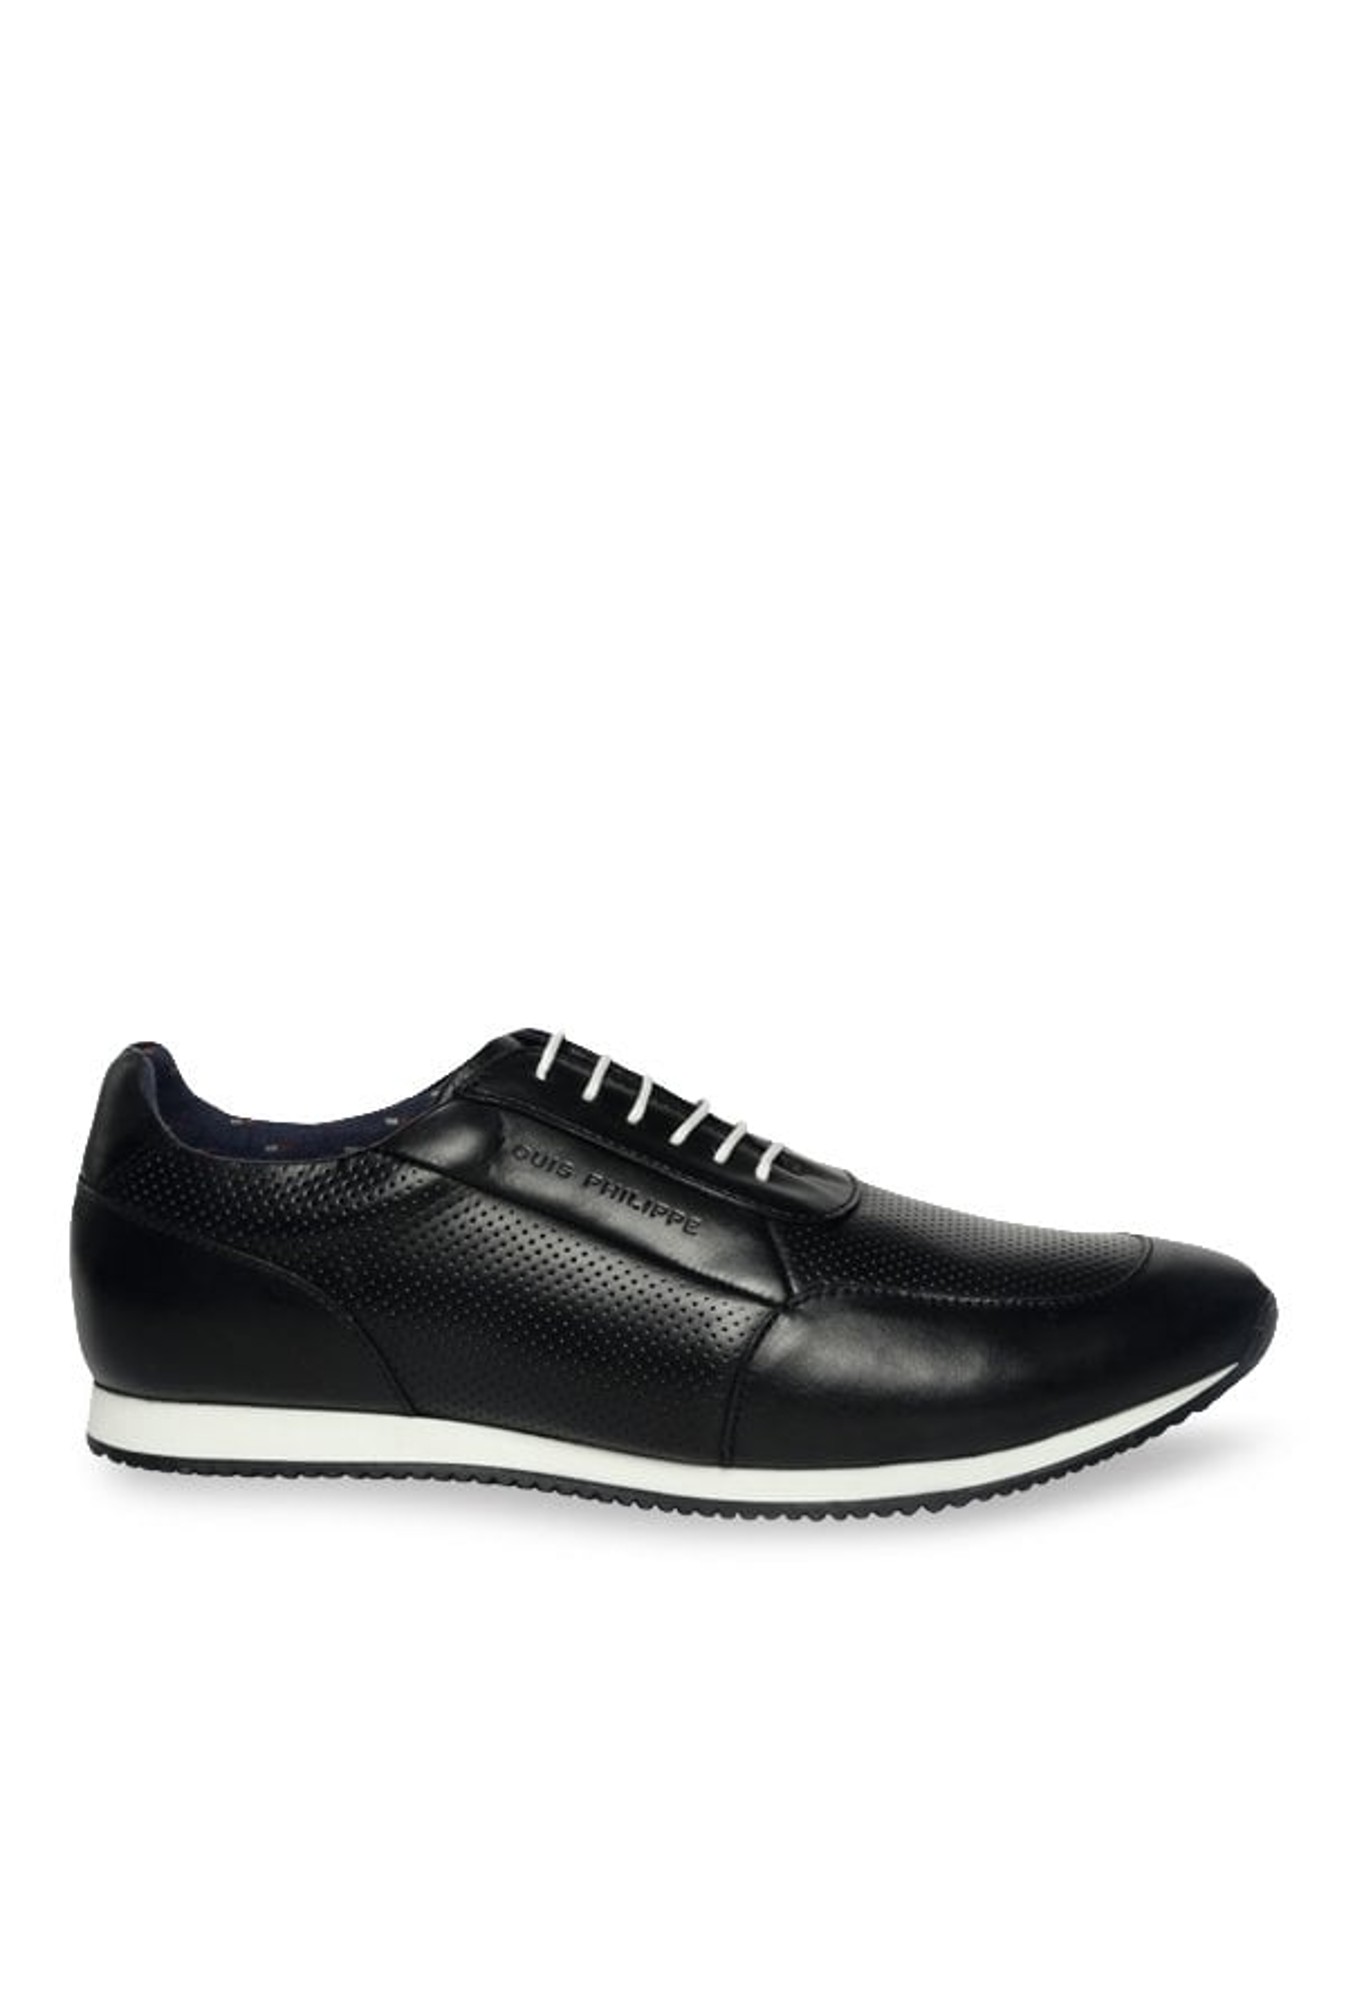 Buy Louis Philippe Black Casual Shoes 